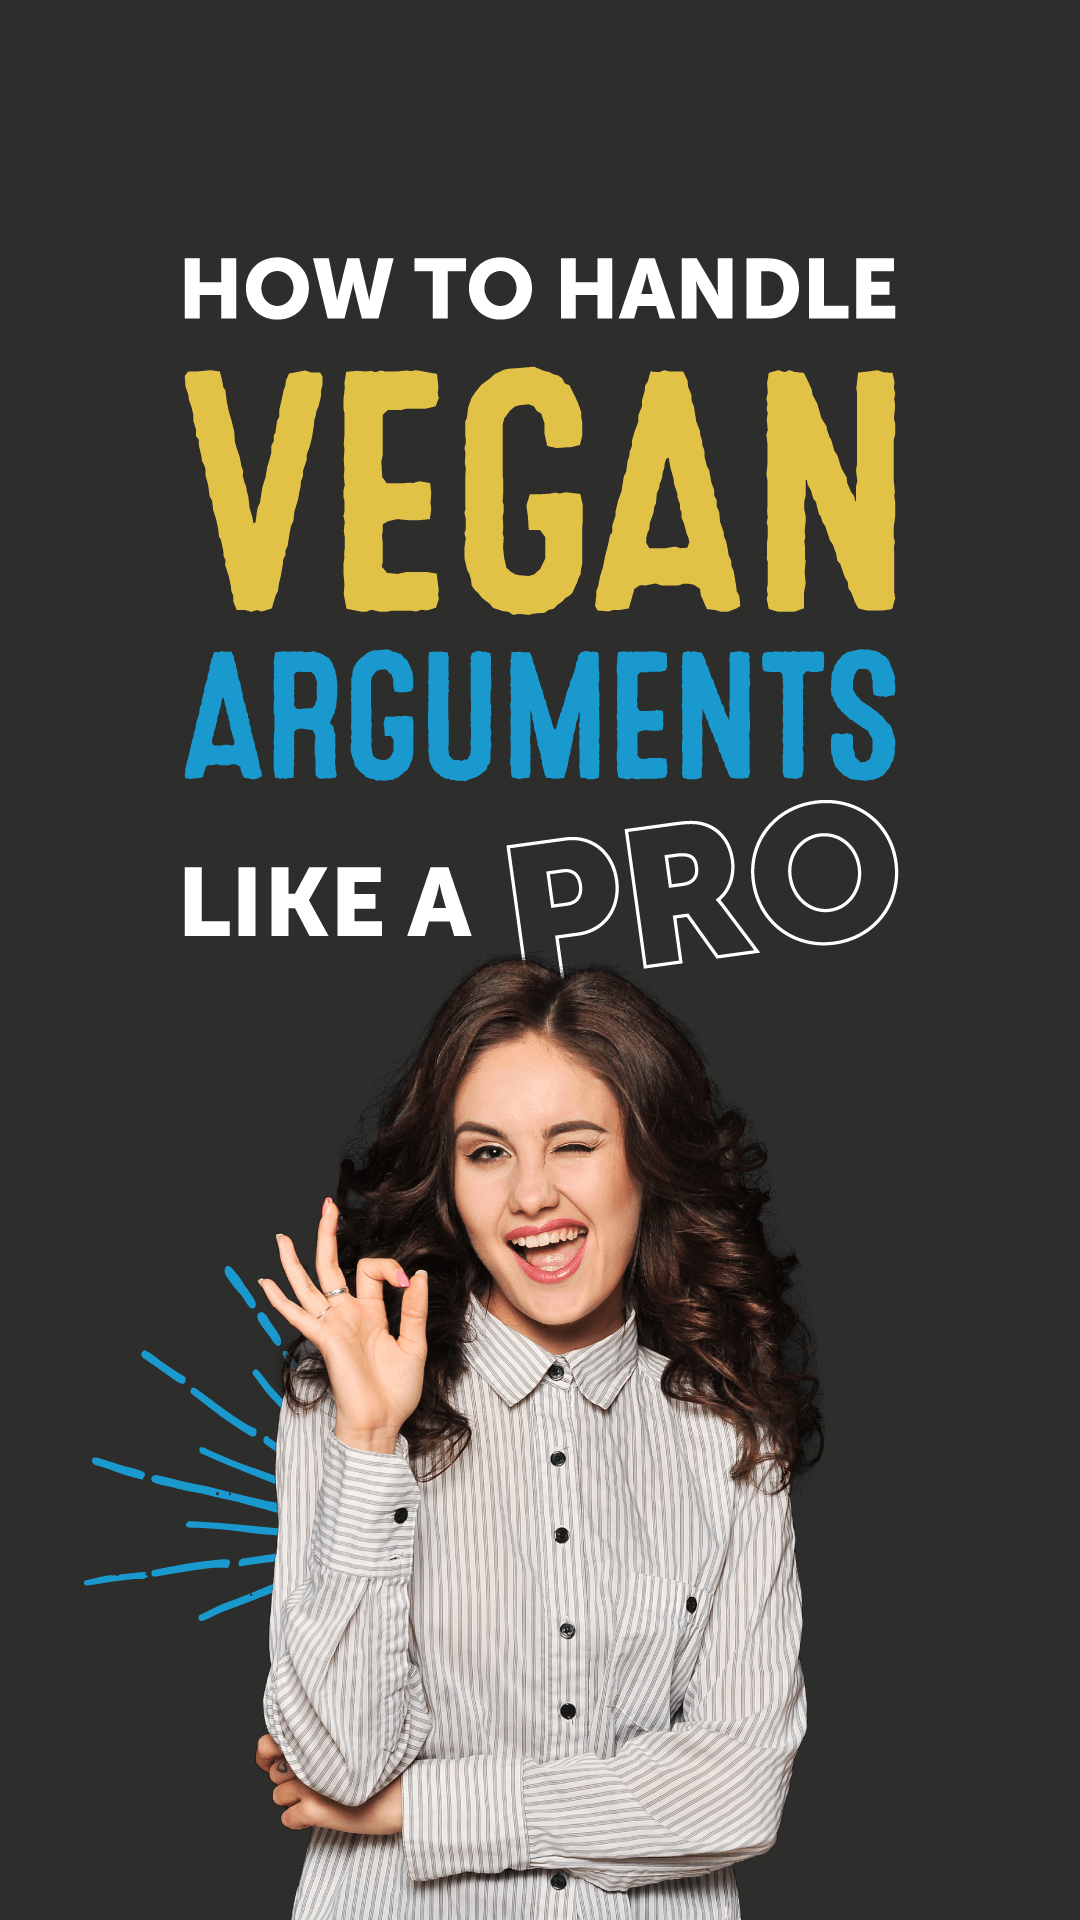 How to Handle Vegan Arguments Like a Pro